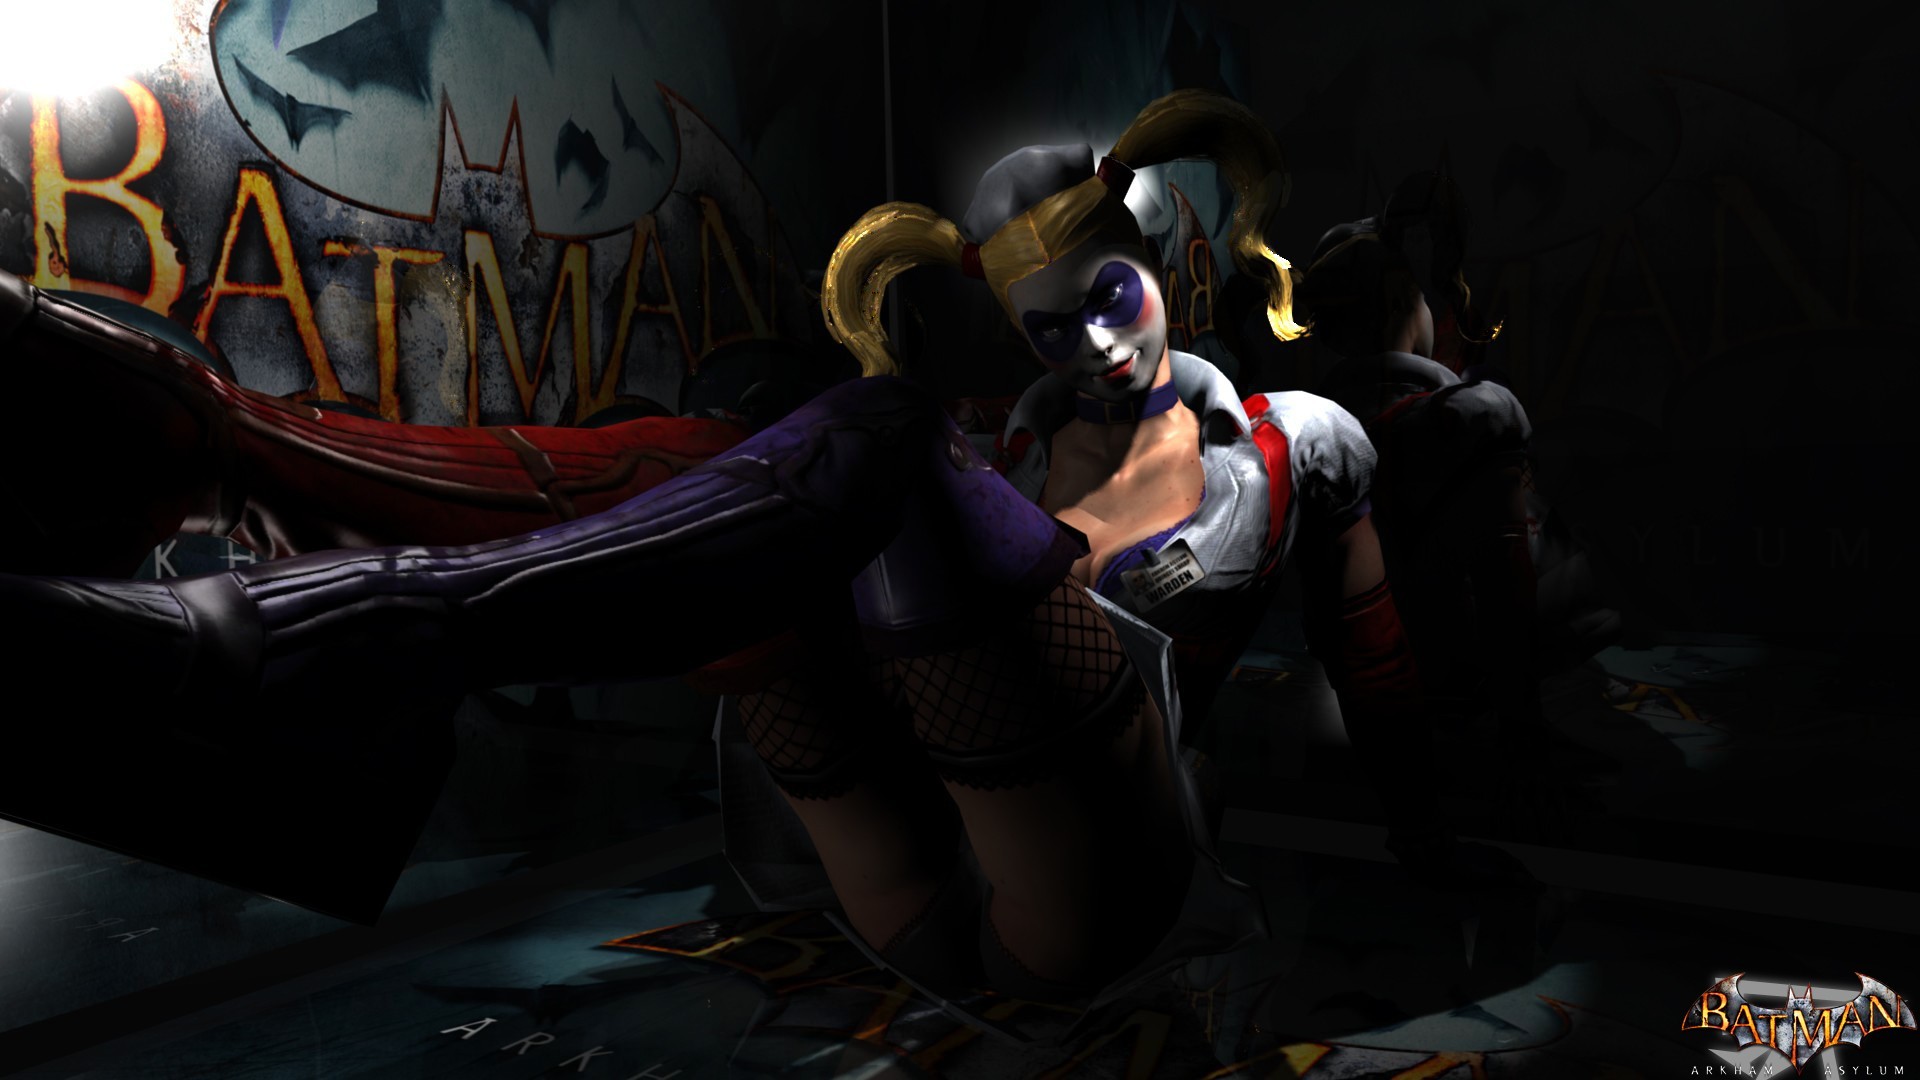 1920x1080 the joker and harley quinn pics - Google Search